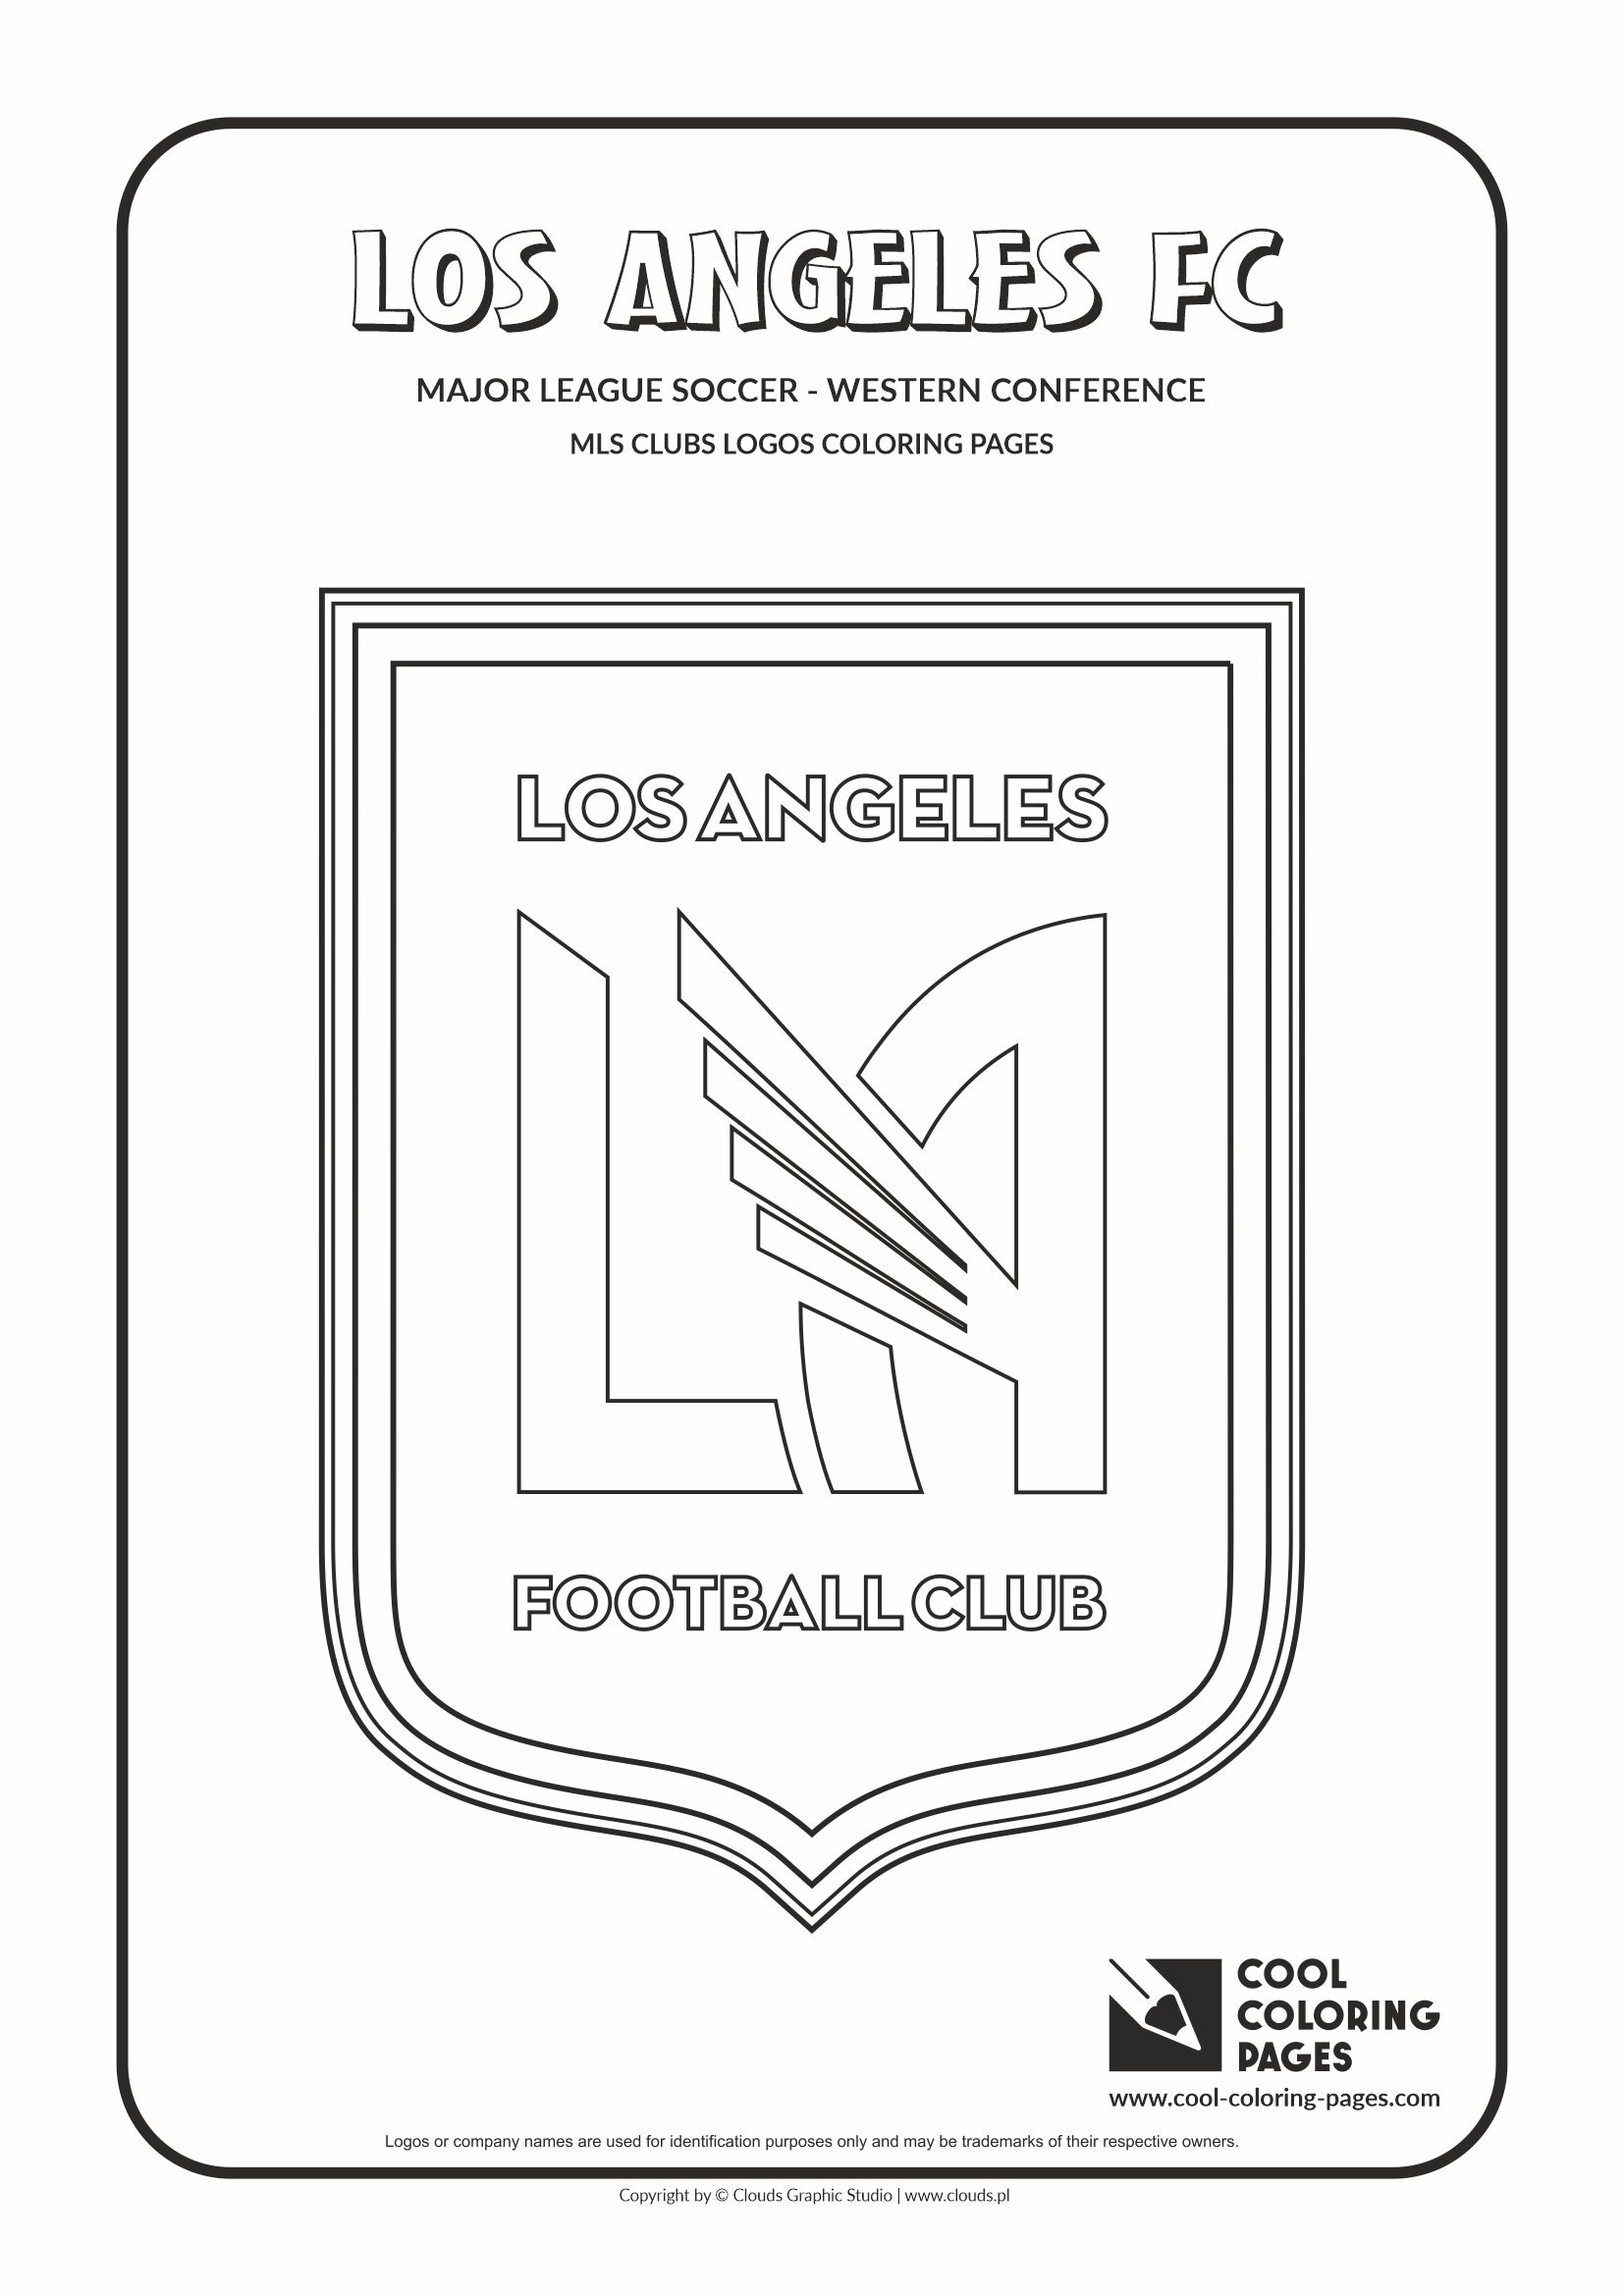 Cool Coloring Pages – MLS clubs logos - Los Angeles FC